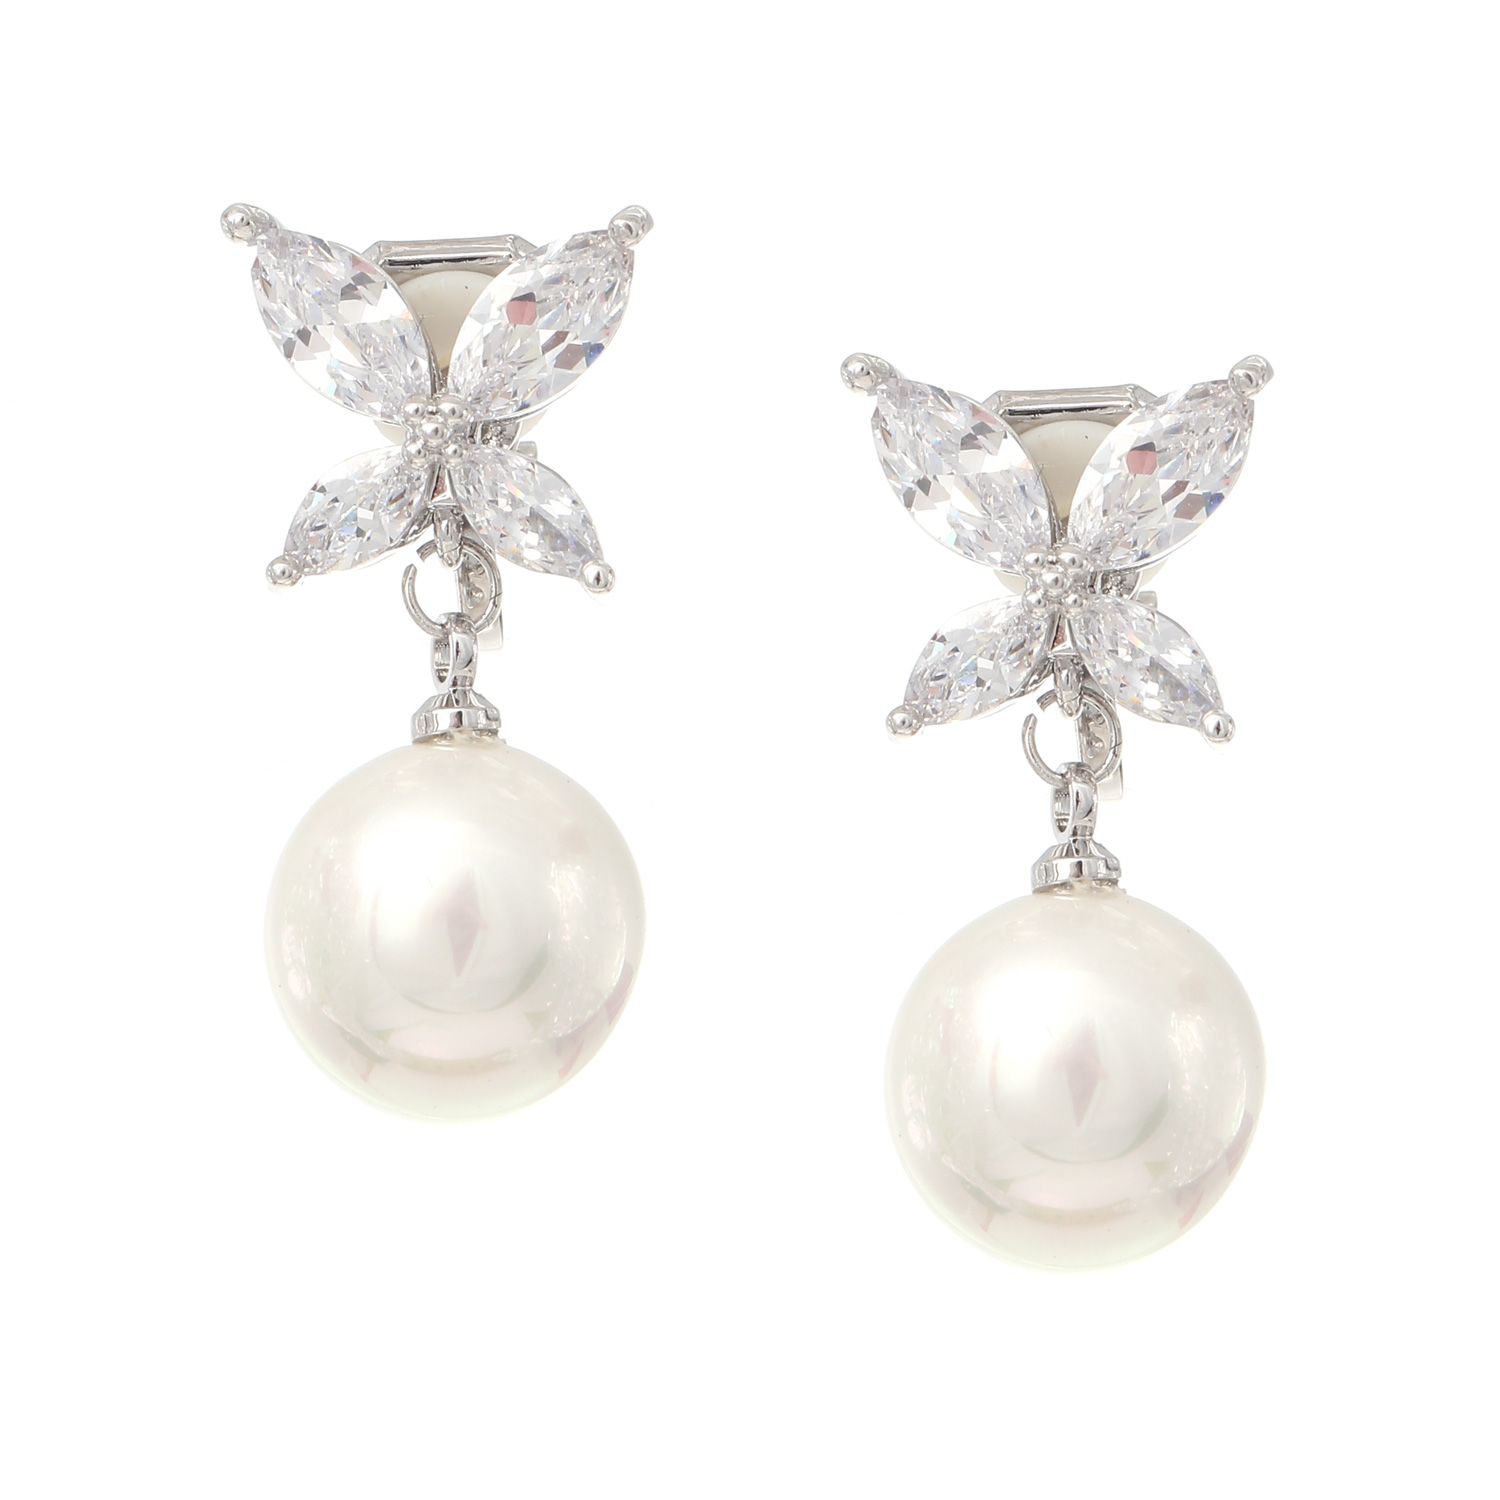 Clip On Earrings with Faux Pearls and Crystals